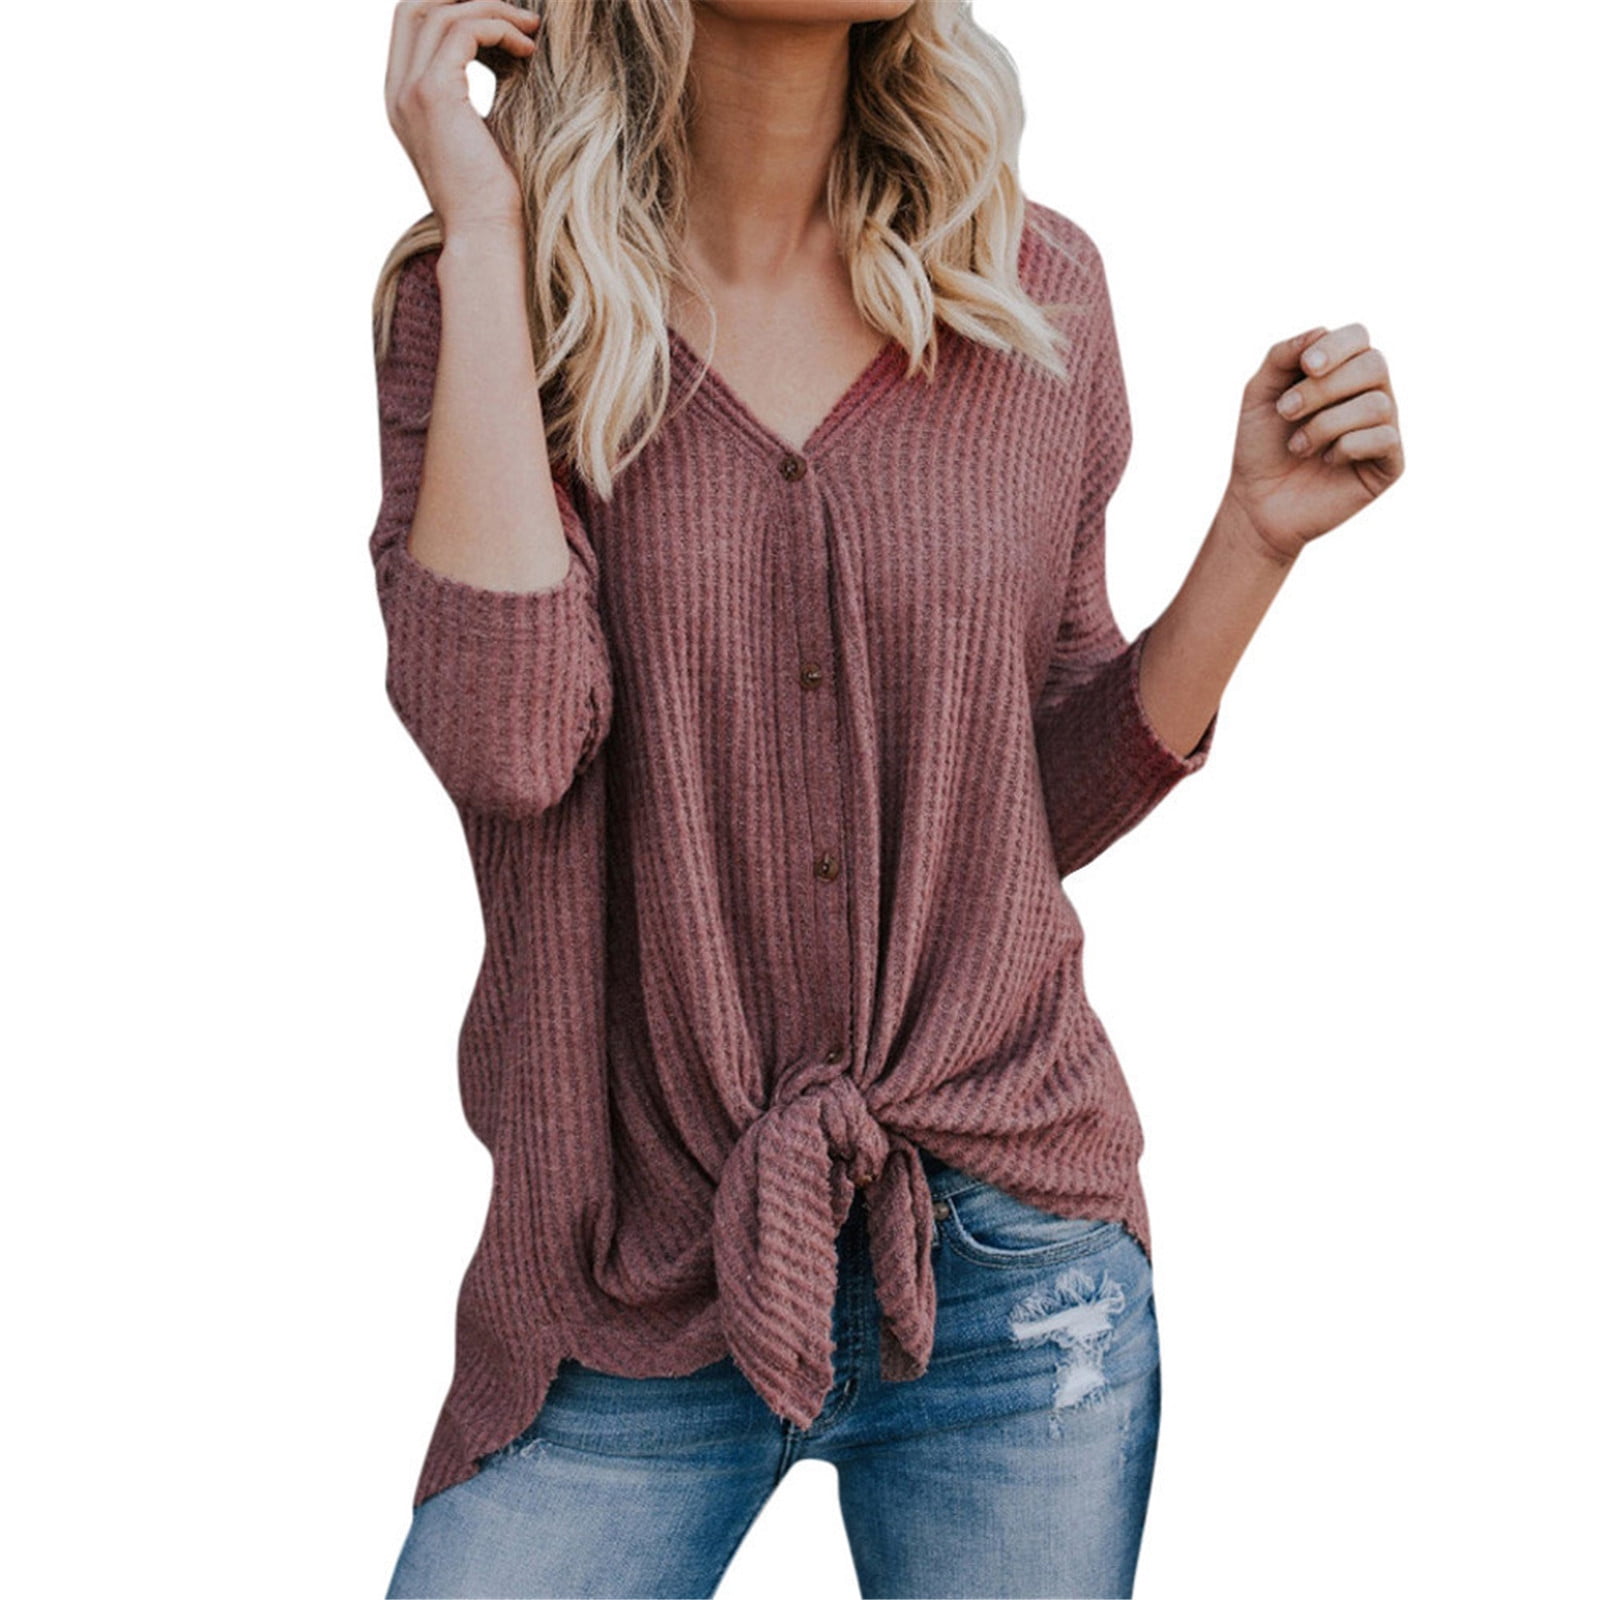 HGWXX7 Womens V Neck Solid Long Sleeve Casual Pullover Jumper Tunic Tops Sweaters 